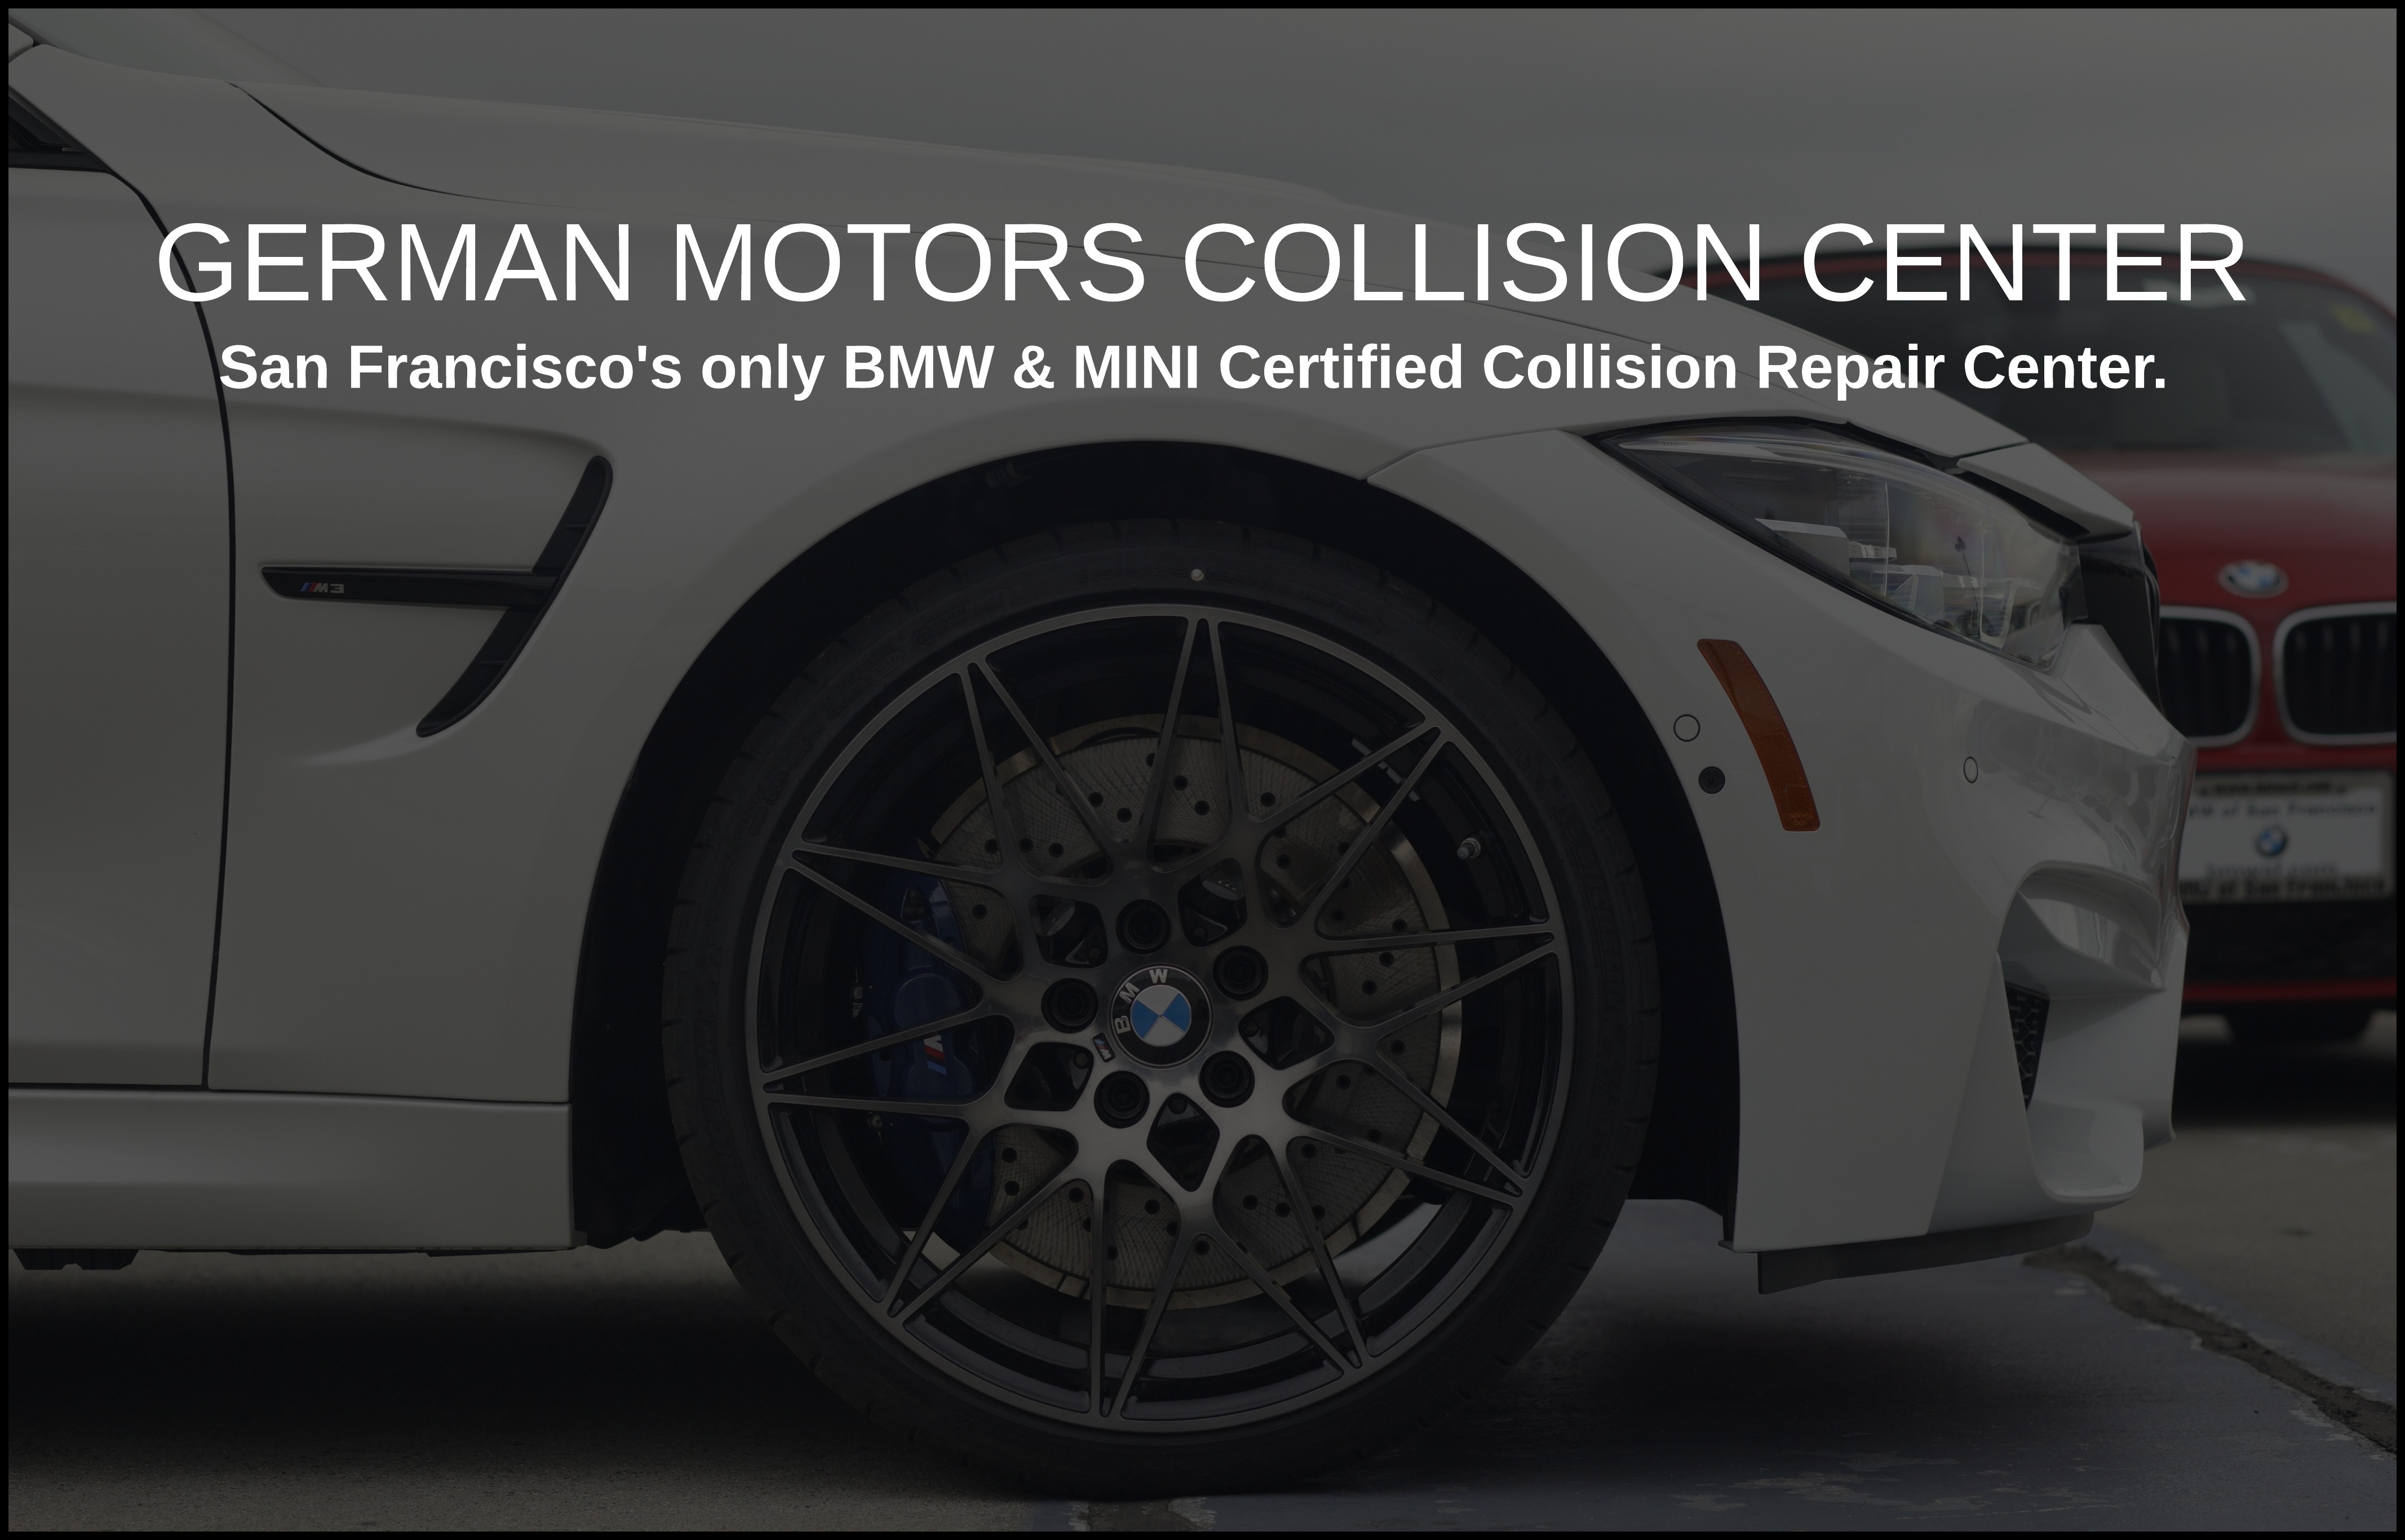 German Motors Collision Center is a full service bodyshop conveniently located in the Bayshore neighborhood of San Francisco